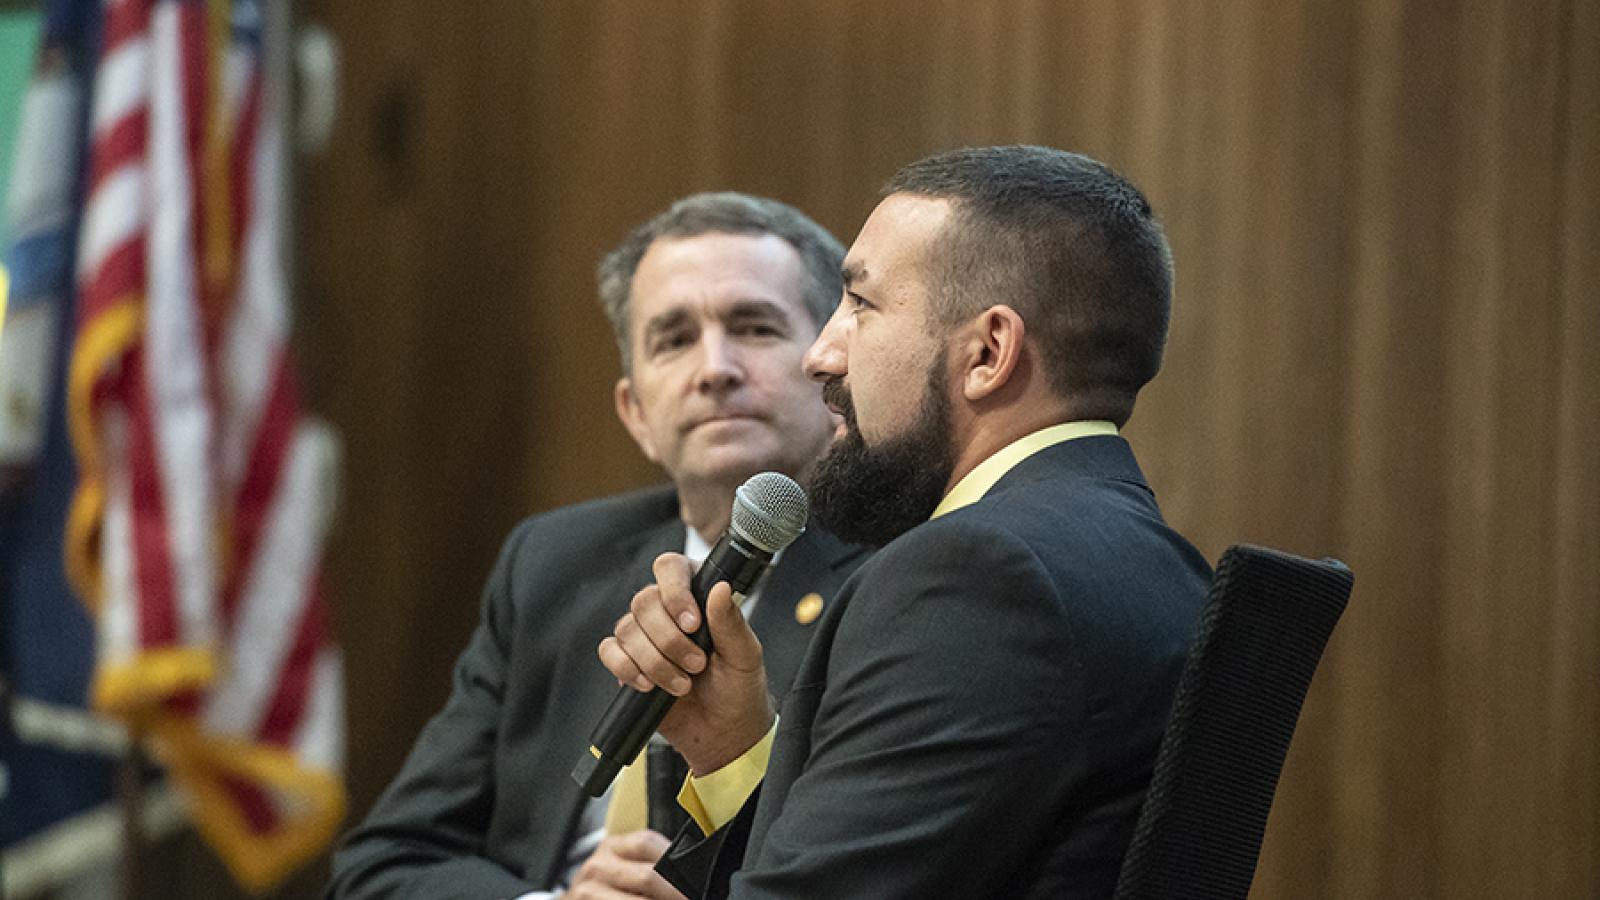 Ryan Hall speaks with Governor Ralph Northam in front of MCV Campus students, faculty and staff about his struggle with opioid addiction, which began after he sufferred an injury at a high school football game. Photo: Allen Jones, VCU University Marketing